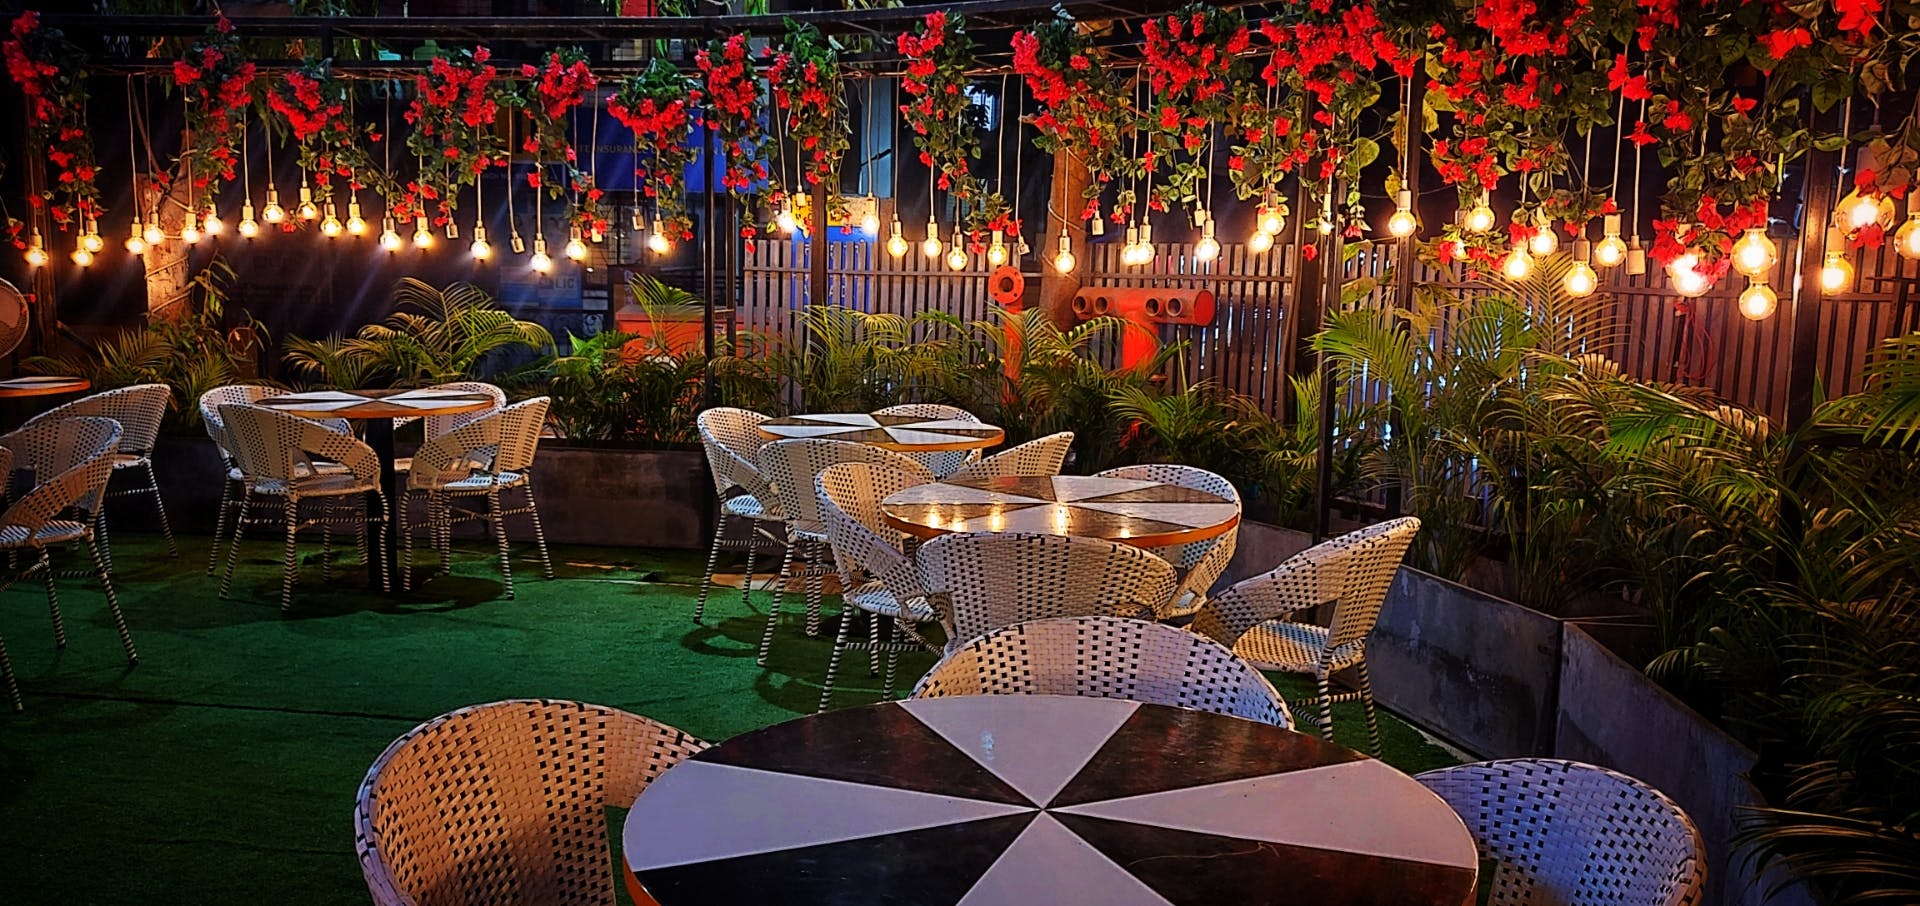 Lighting,Furniture,Table,Chair,Outdoor furniture,Outdoor table,Landscape lighting,Garden,Decoration,Landscaping